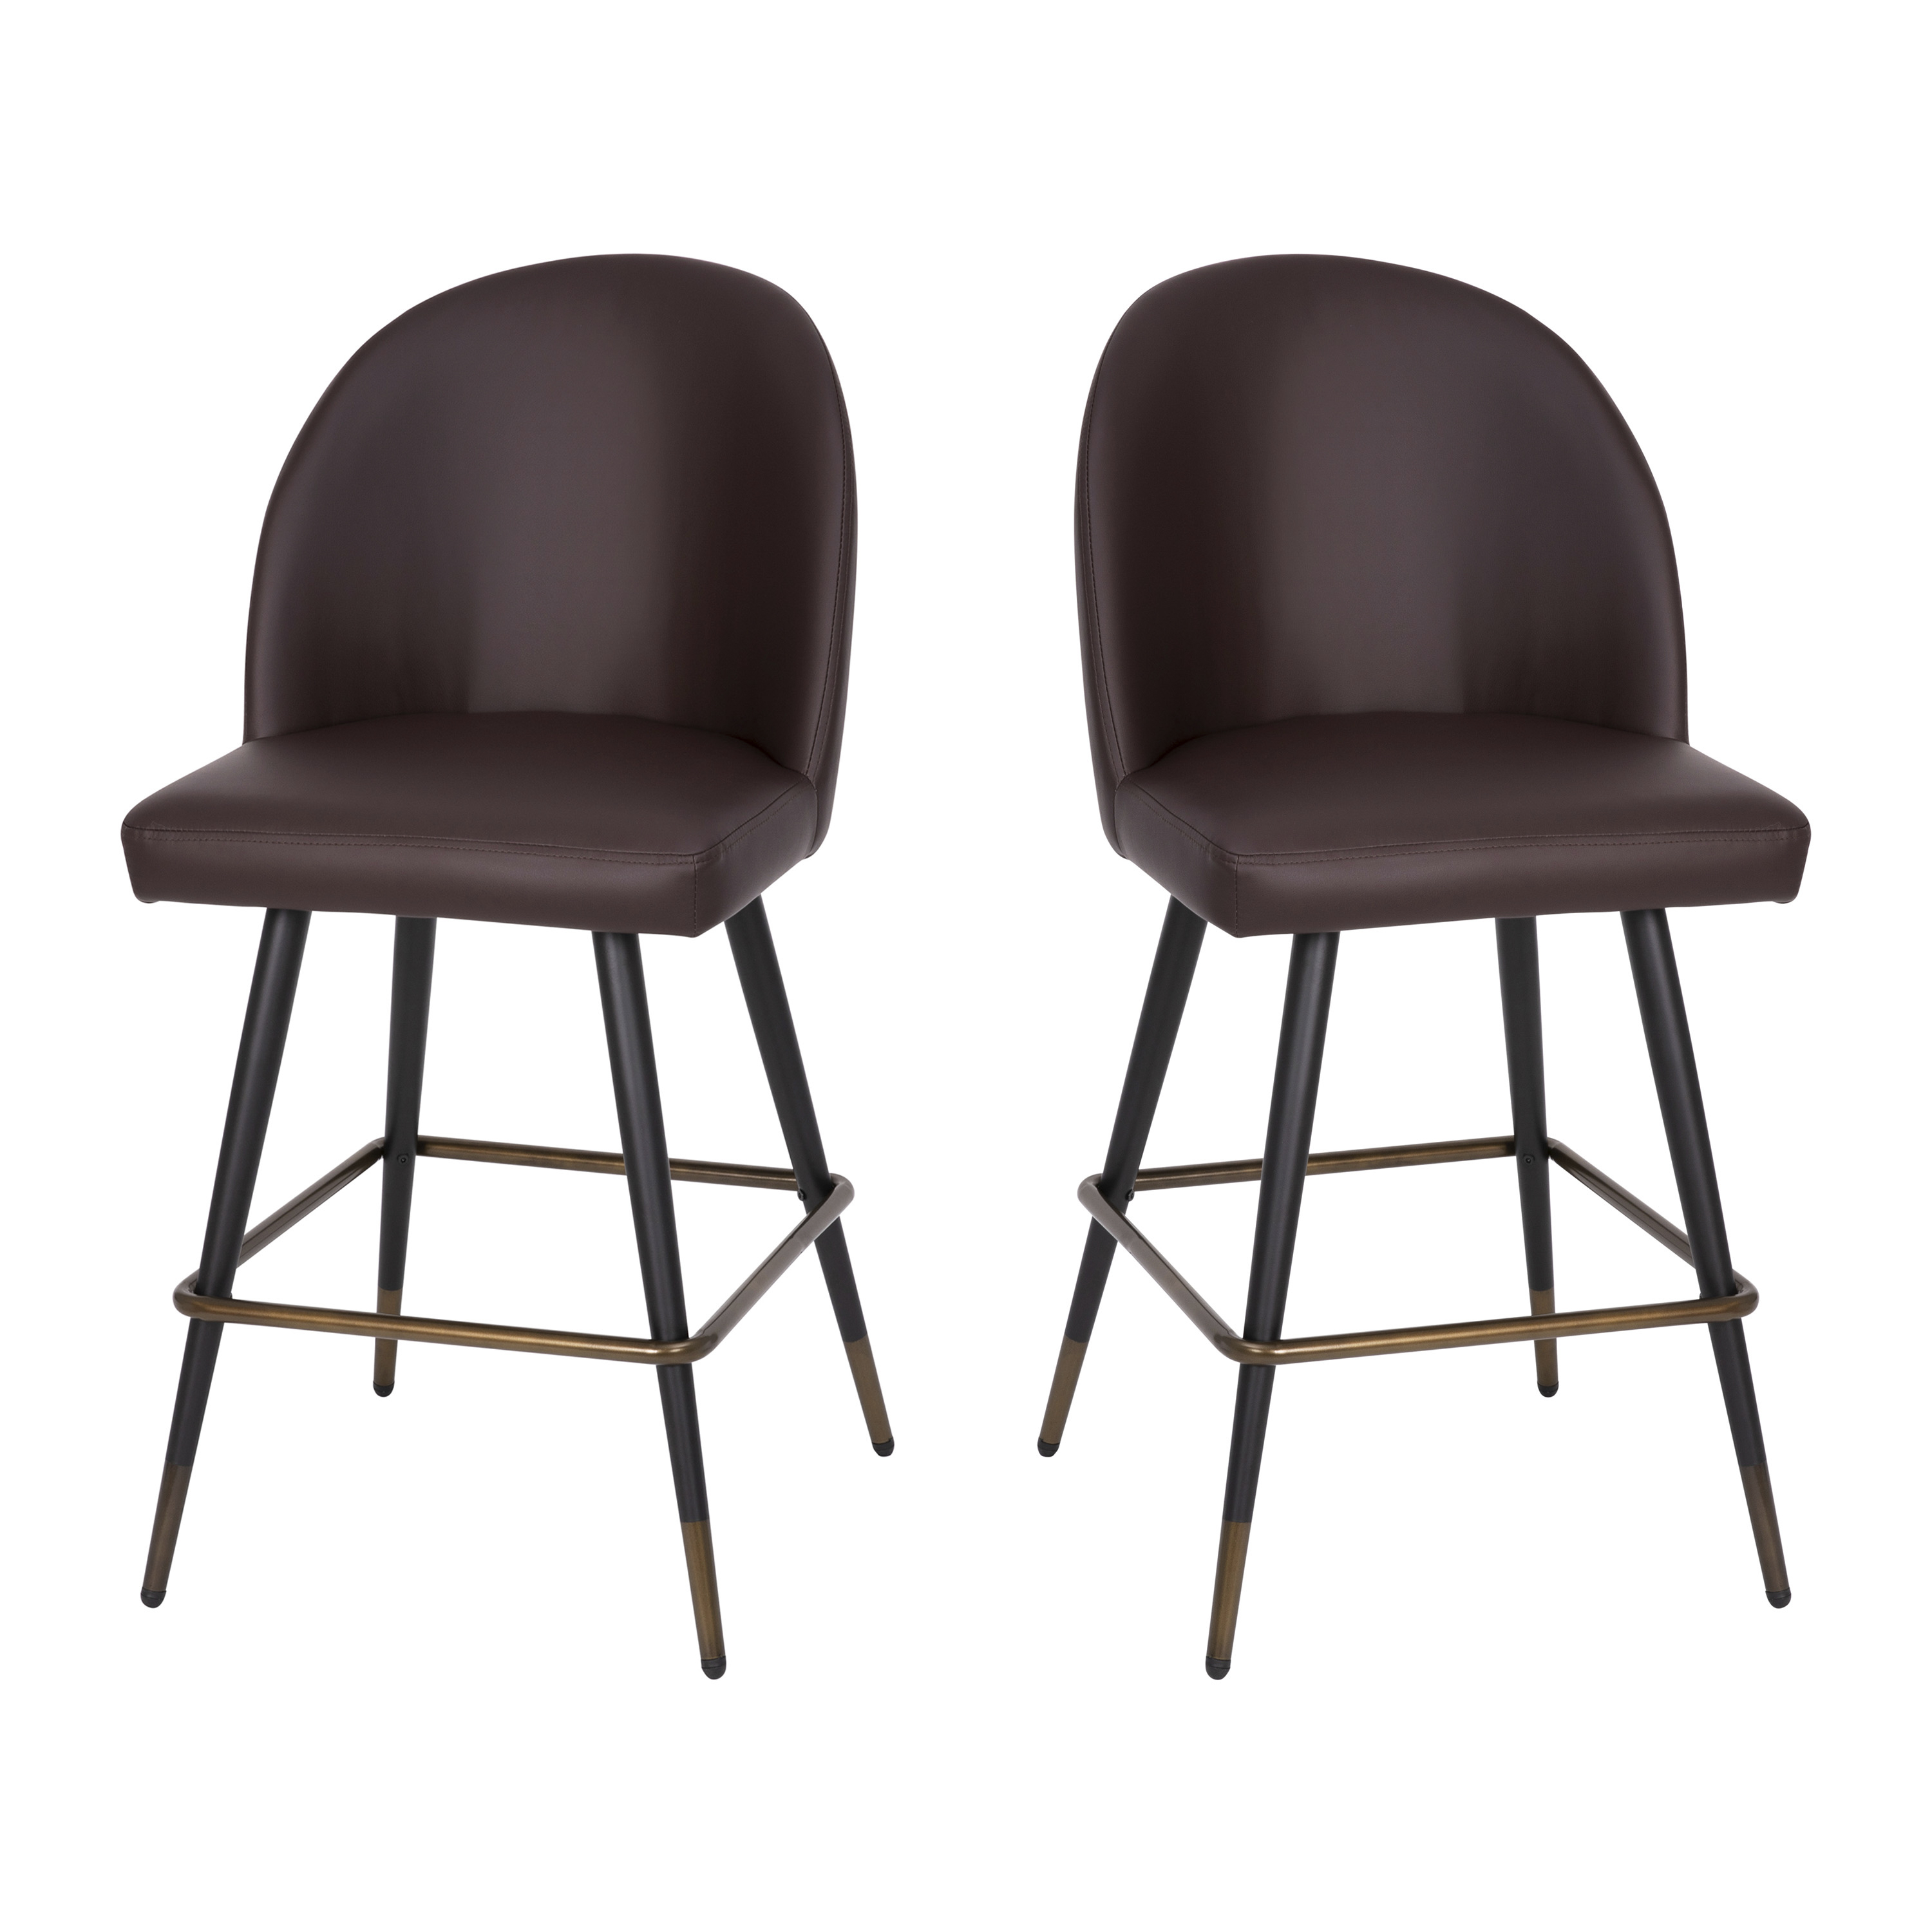 Flash Furniture AY-1026H-26-BR-GG Brown LeatherSoft High Back Modern Armless 26" Counter Stool with Contoured Backrest,,, Set of 2